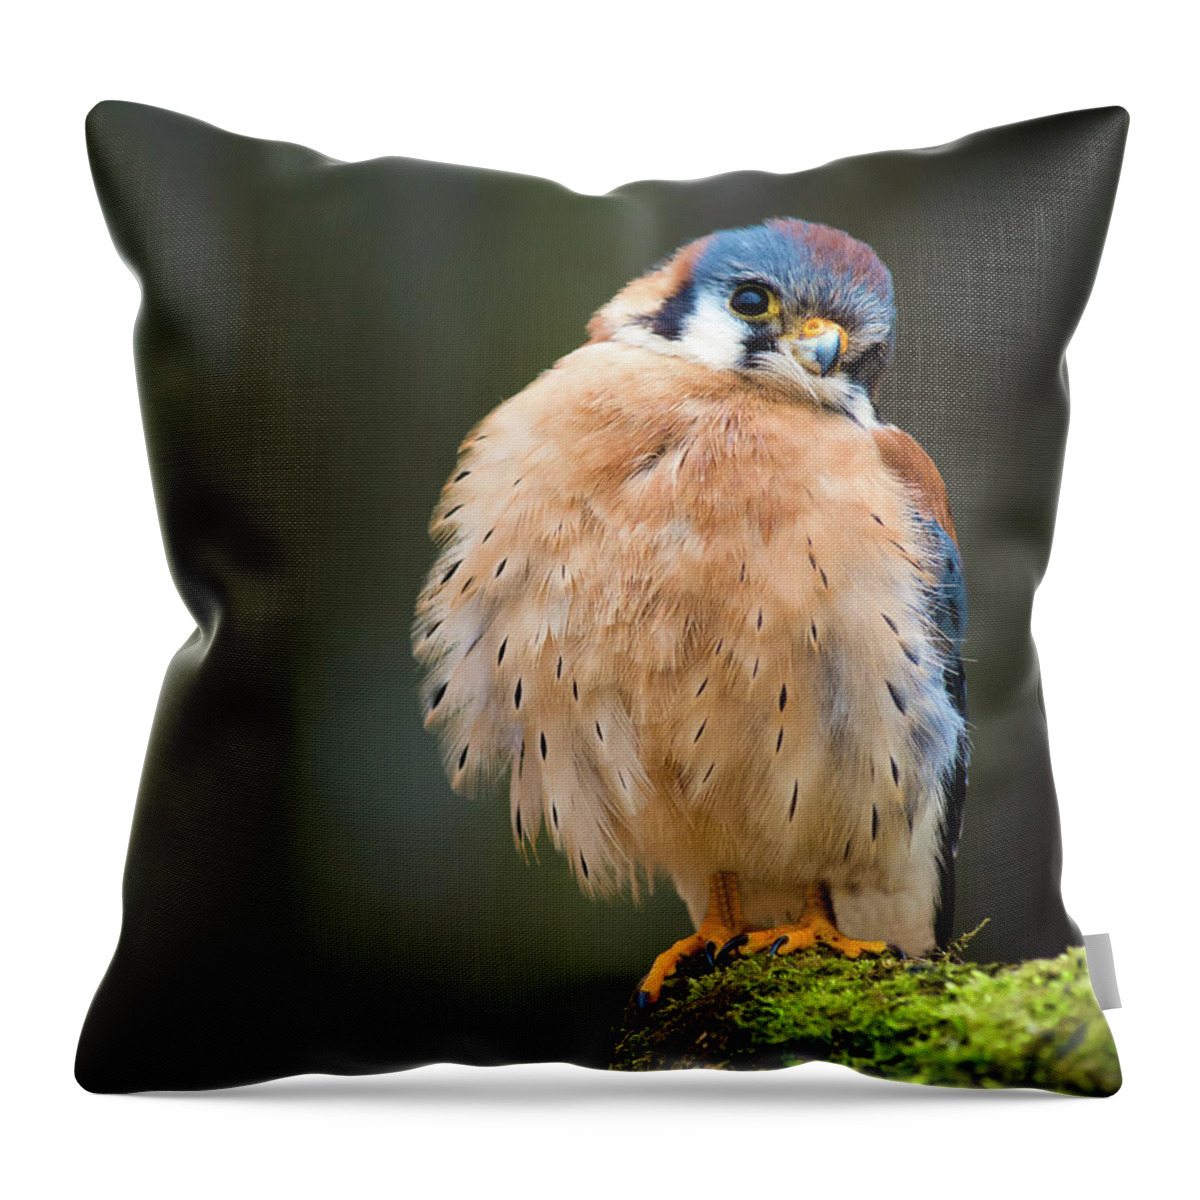 Animals Throw Pillow featuring the photograph American Kestrel by Tracy Munson